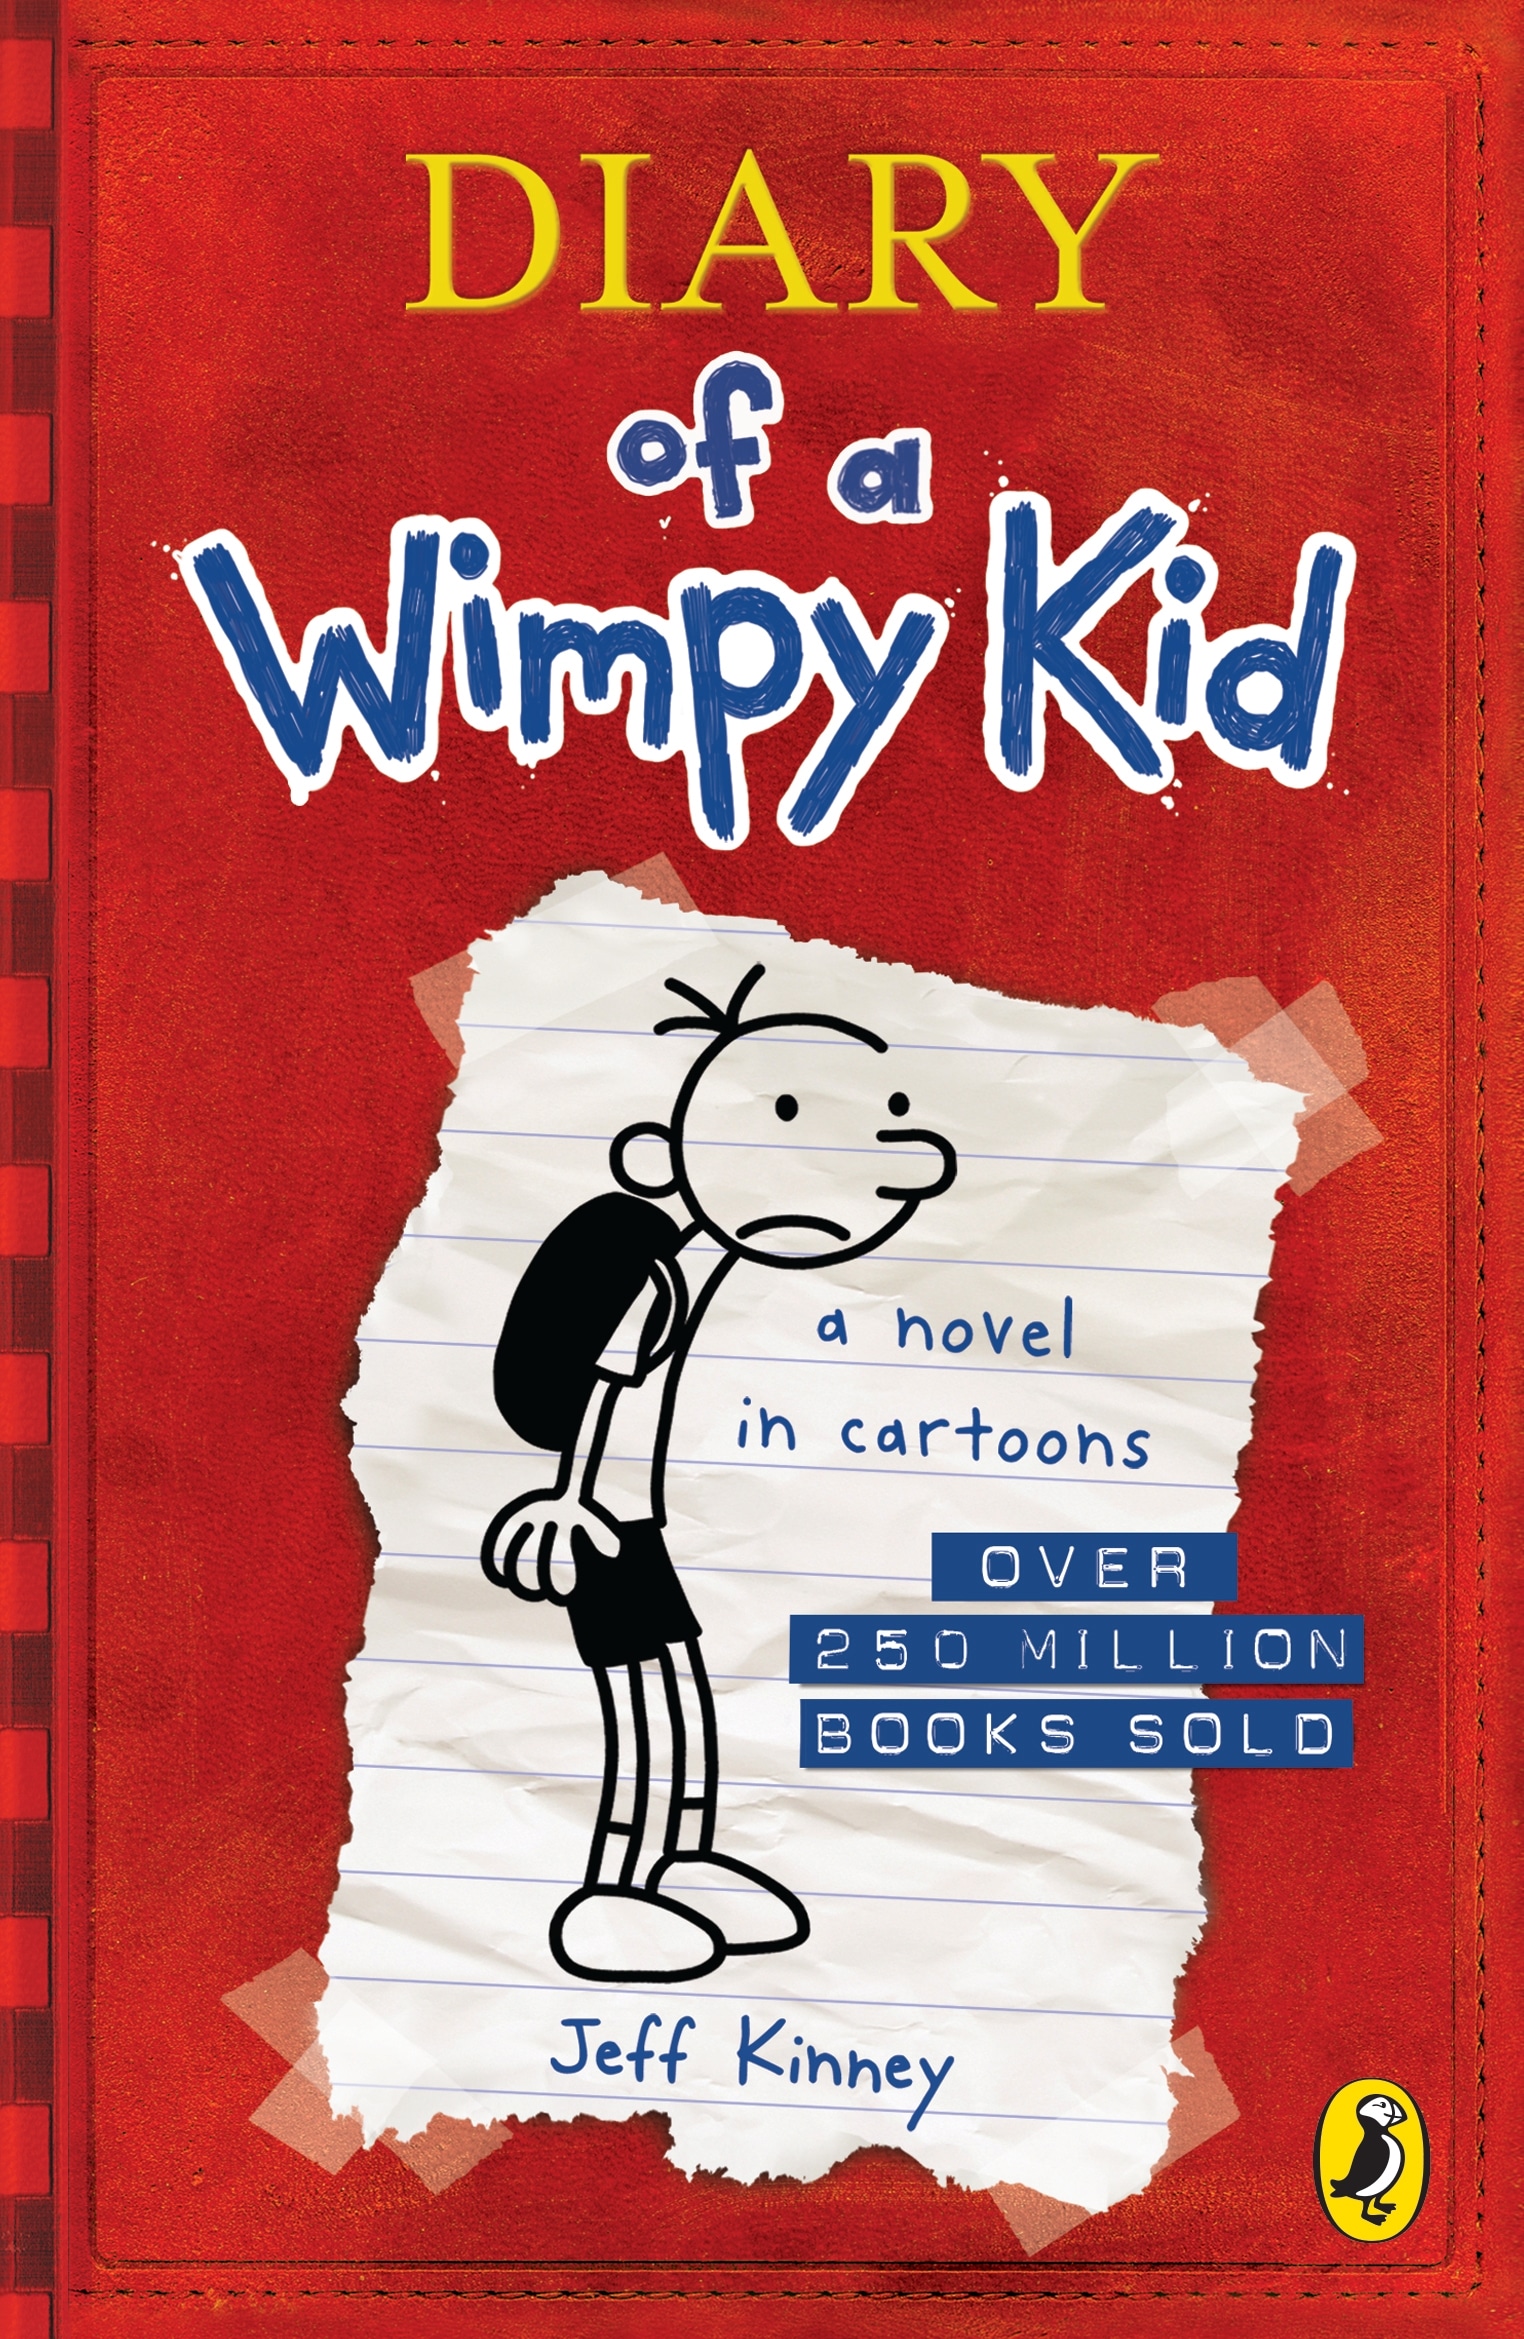 Book “Diary Of A Wimpy Kid (Book 1)” by Jeff Kinney — July 3, 2008